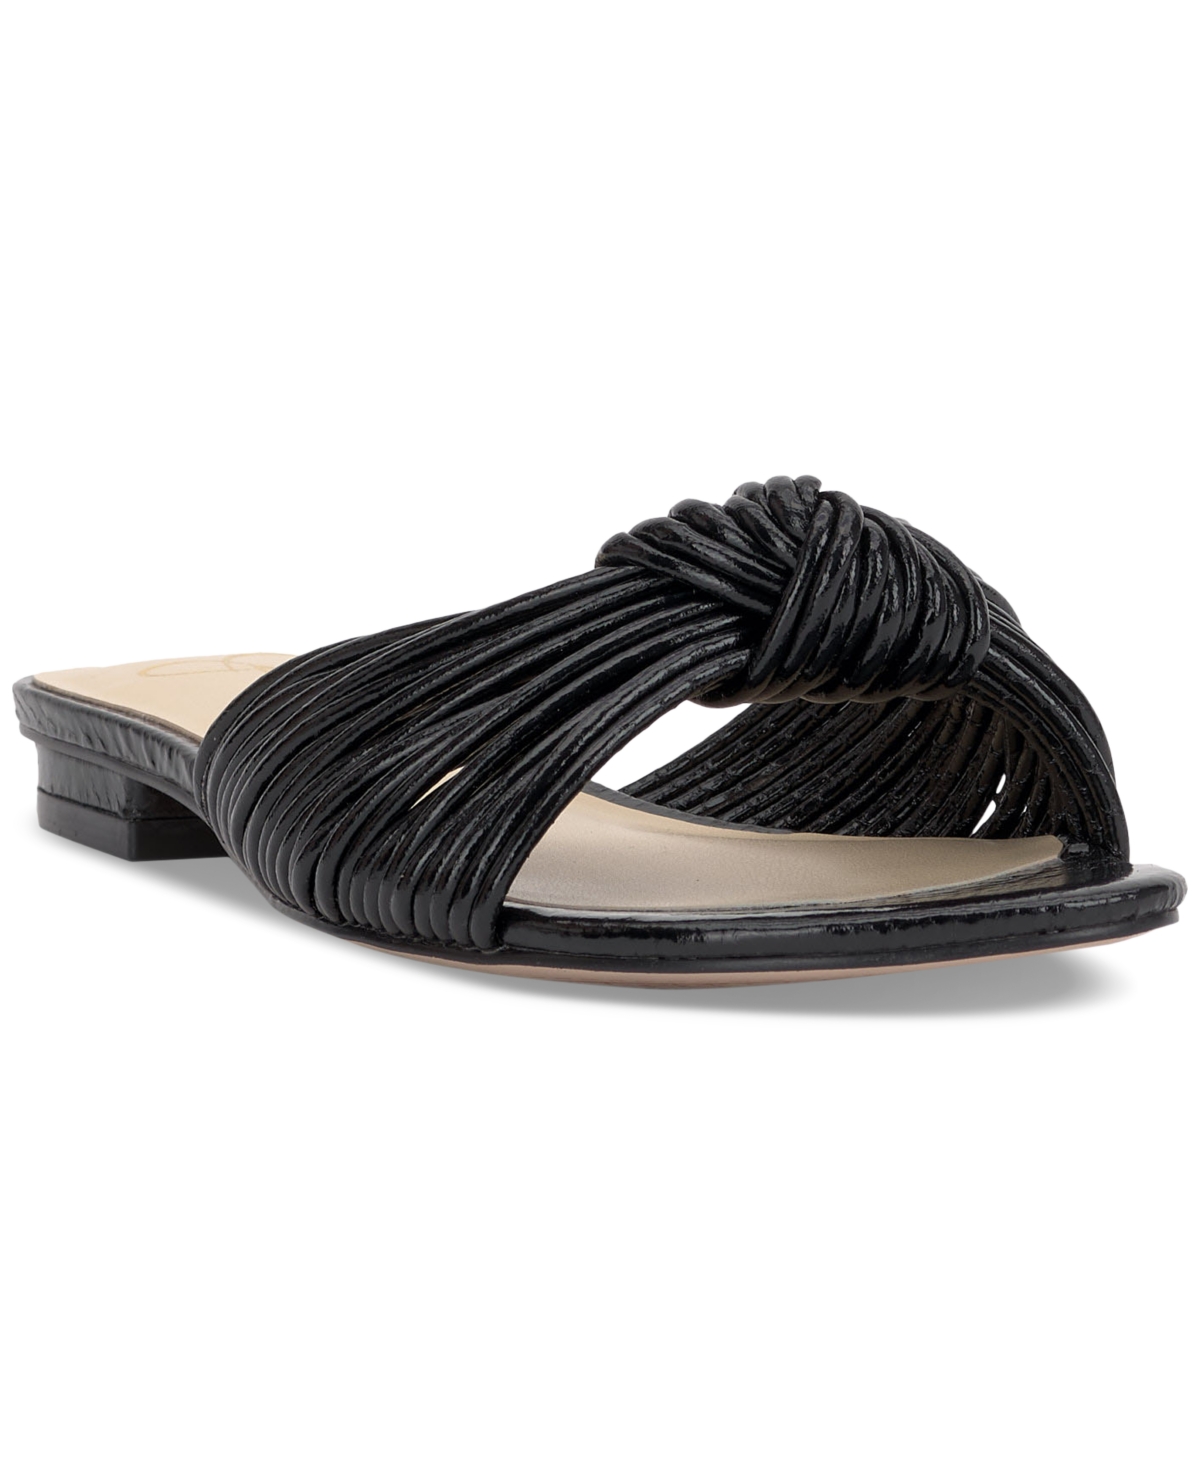 Women's Dydra Knotted Strappy Flat Sandals - Buff Faux Leather